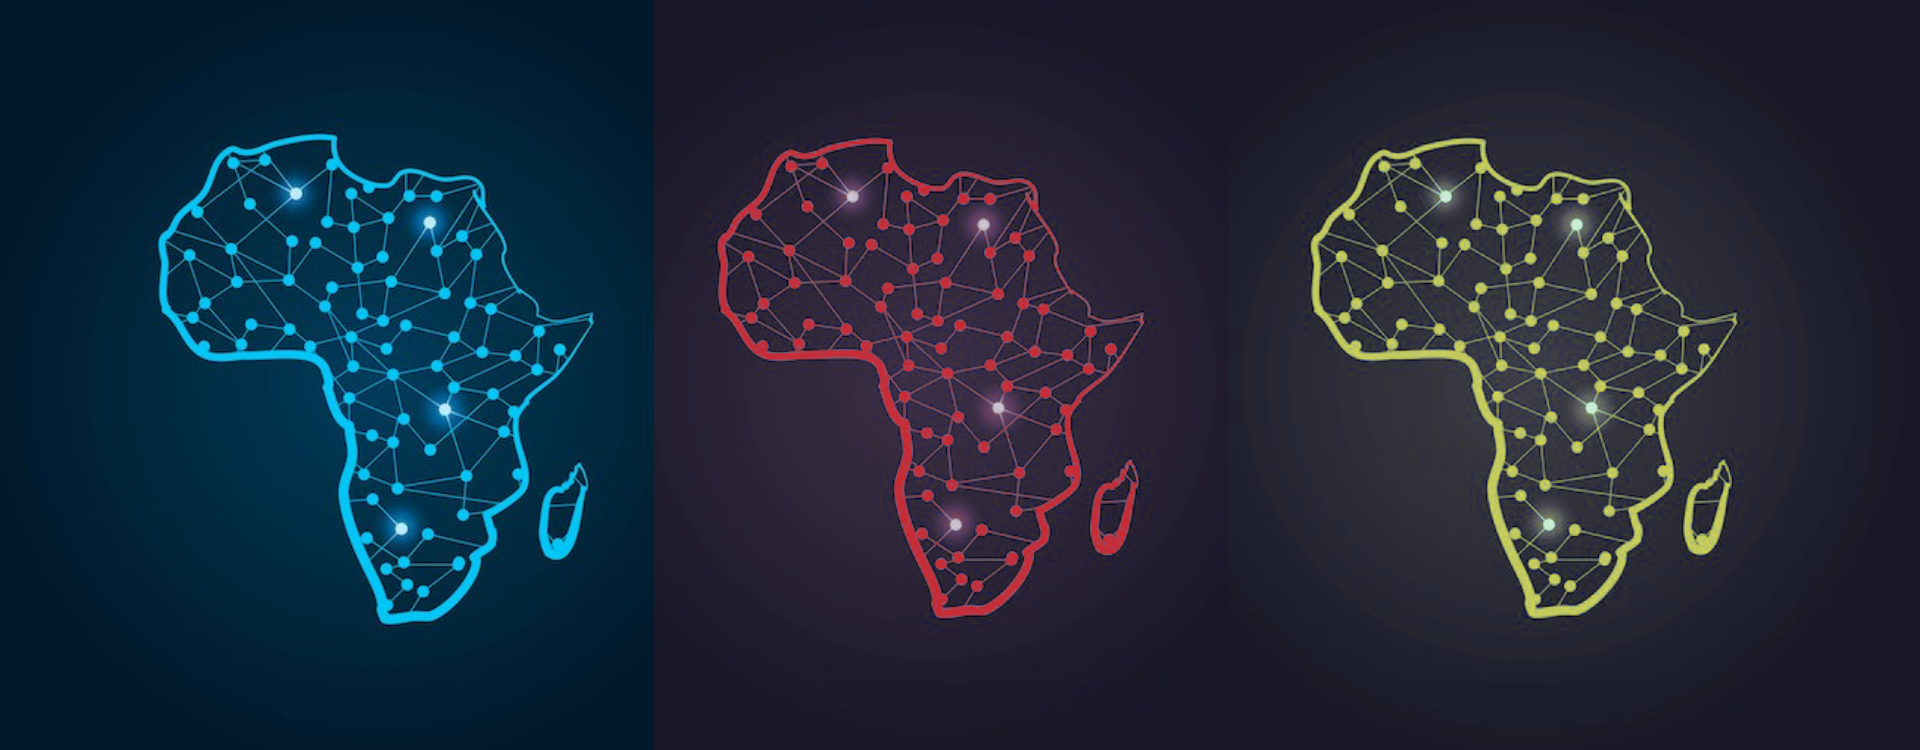 How will global futures affect intra-Africa relations?